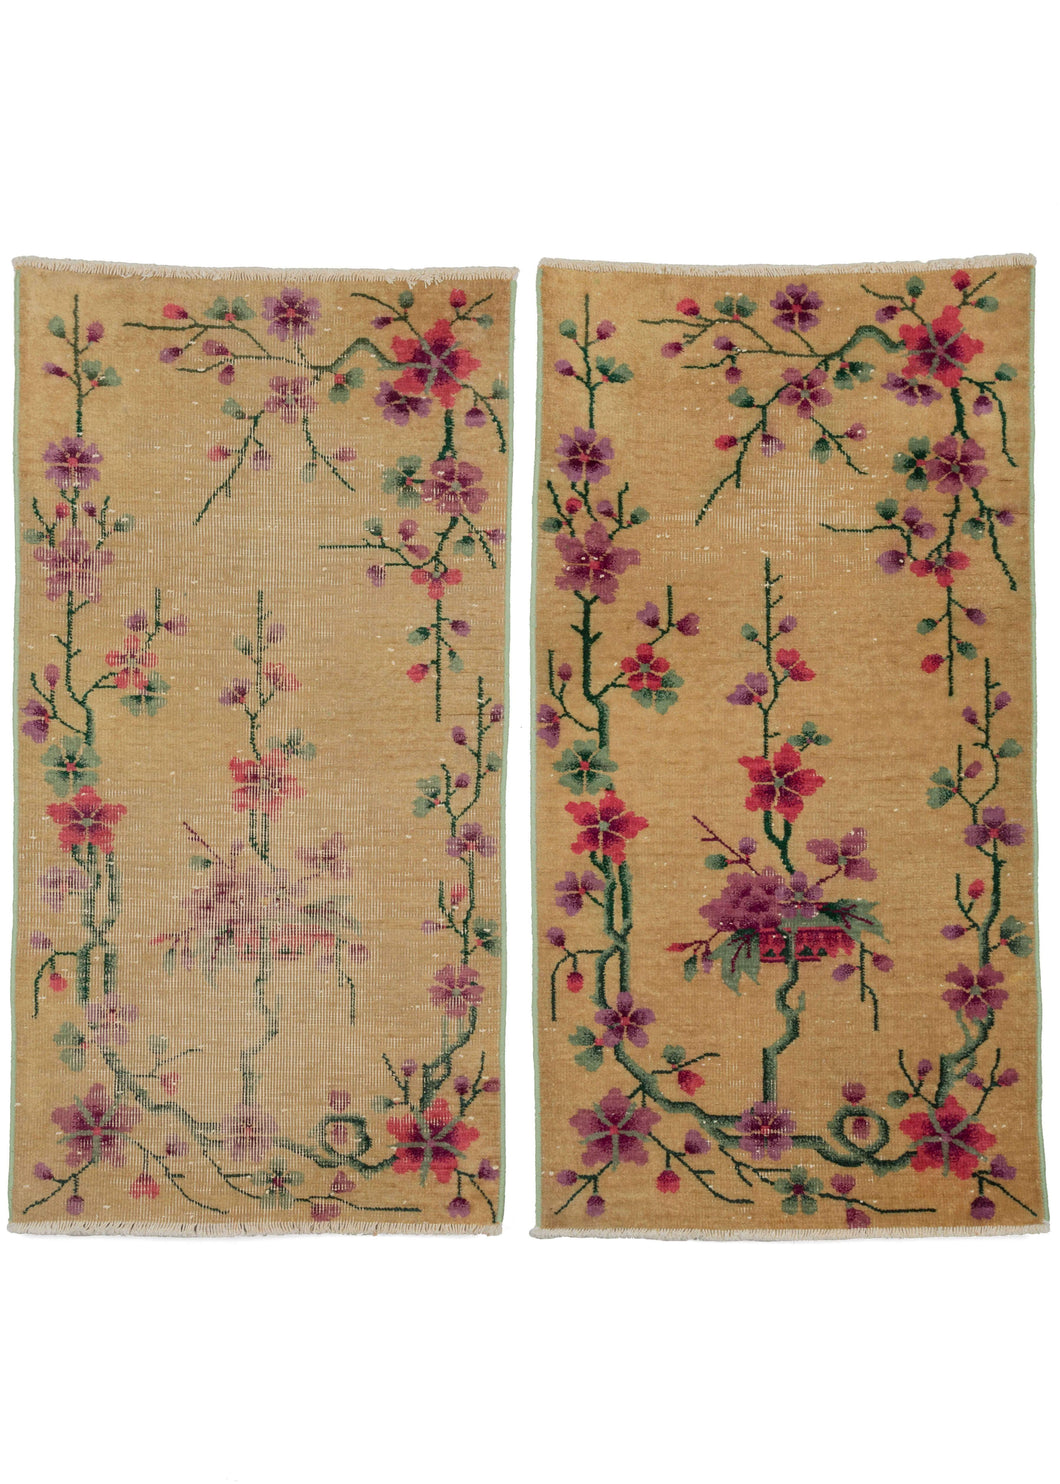 Two matching antique yellow deco scatter rugs featuring a delicate floral design in soft purples, greens, and bright pinks, all on a yellow ground. In varying conditions: one is in good condition, with one slightly worn patch while in the other a majority of the field is worn, as pictured. Both have a low pile and a very sturdy handle. Both rugs have reinforced edges and sides to increase longevity.